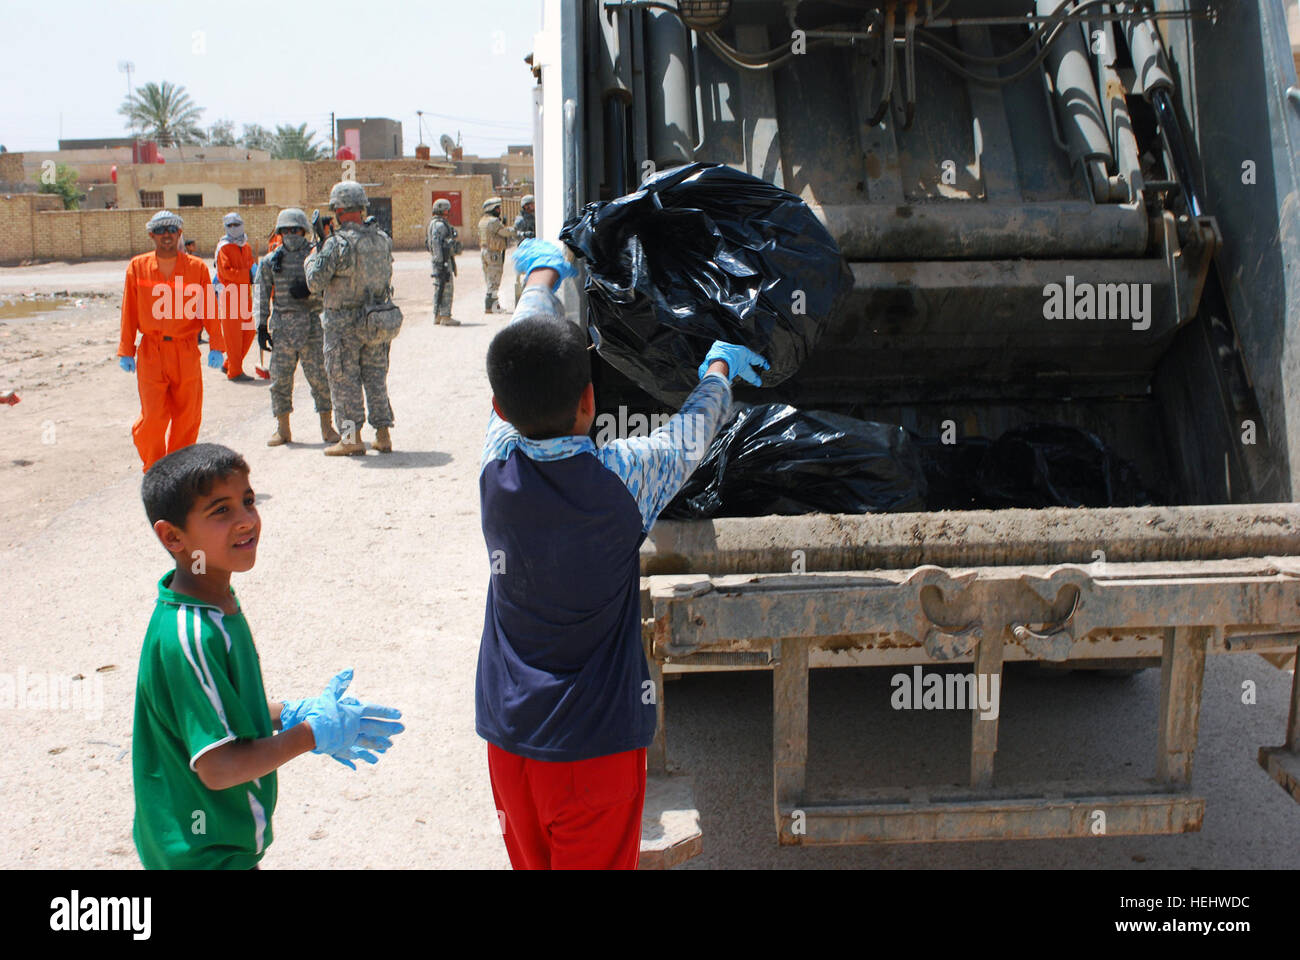 A local boy throws a trash bag into the back of a garbage truck during Dujaylah Pride Day April 18. Kids joined in the event that showed the local community the unity between the Iraqi security forces, Government of Iraq and coalition forces to strengthen community ties. Iraqi security forces lead the way for Dujaylah Pride Day 166217 Stock Photo